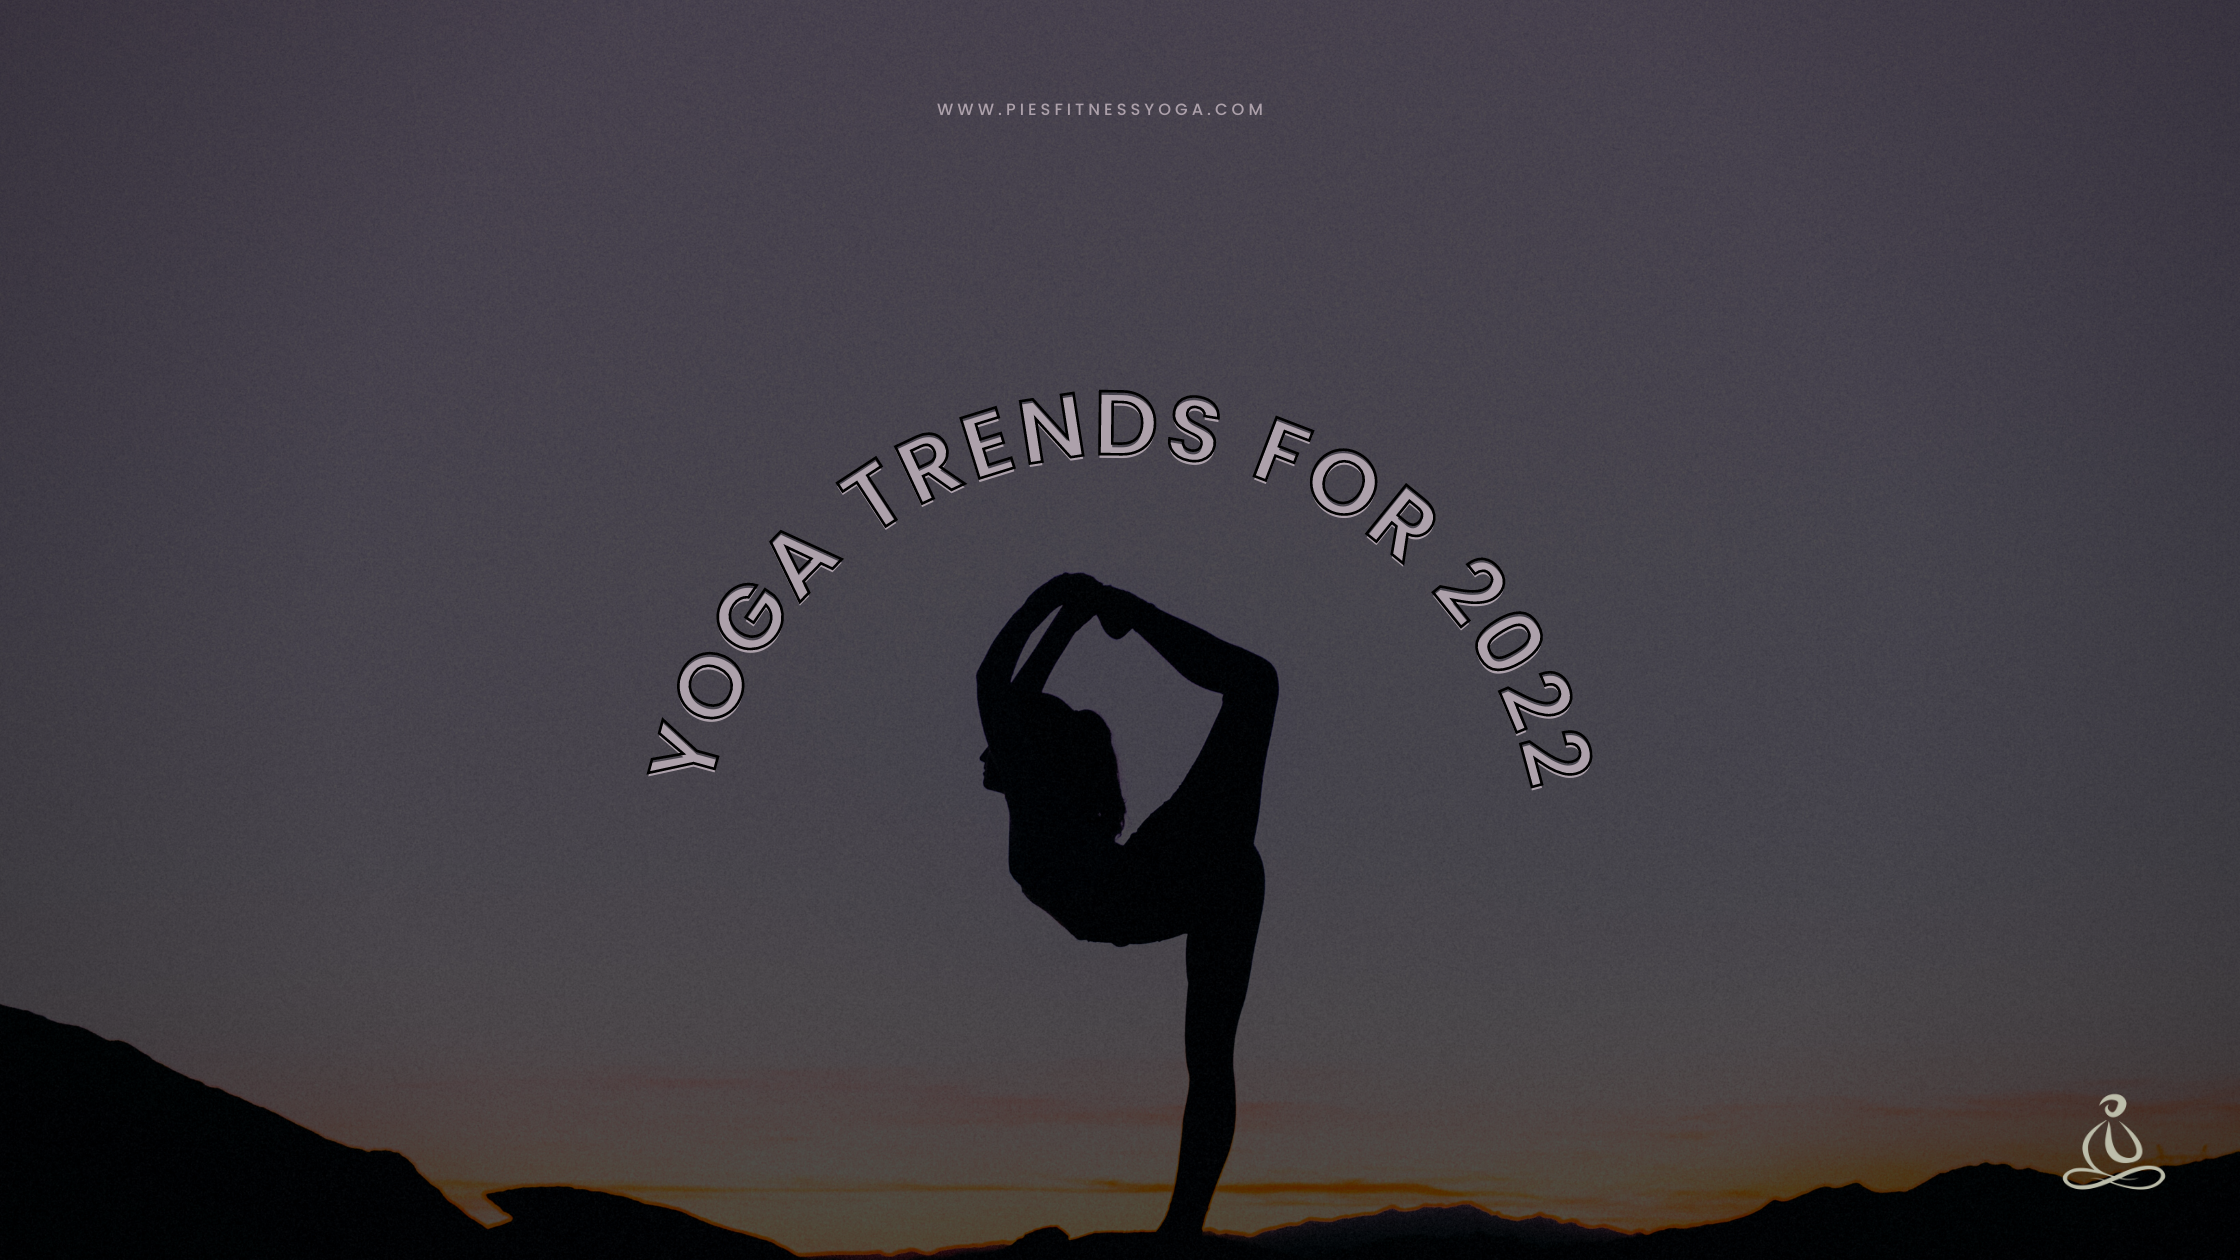 What are new trends in yoga?